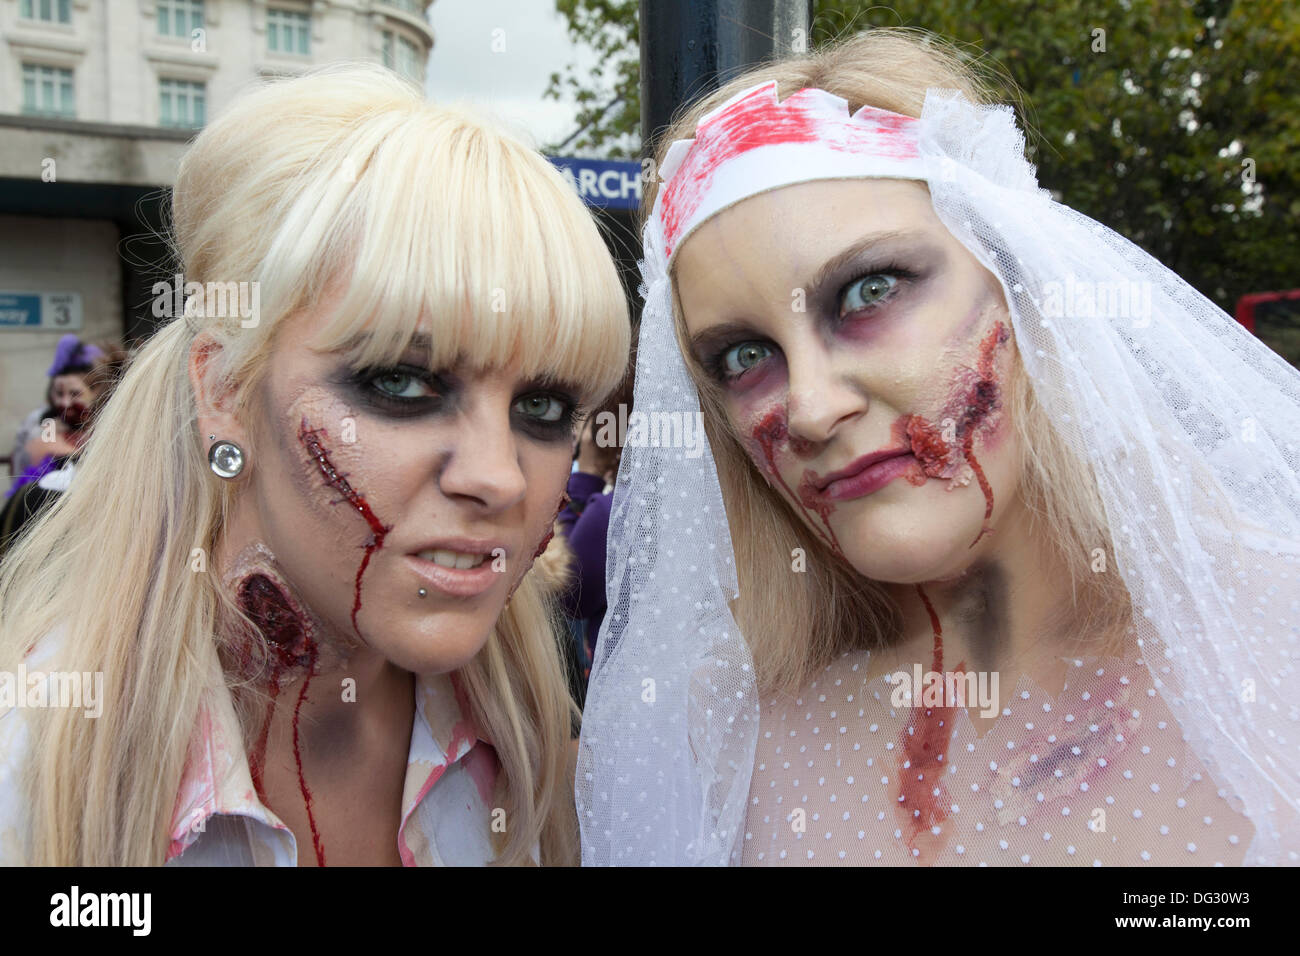 London, UK. 12th Oct 2013. London attracts thousands of zombies each year to groan and shamble through Central London in aid of the charity St. MungoÕs. Stock Photo